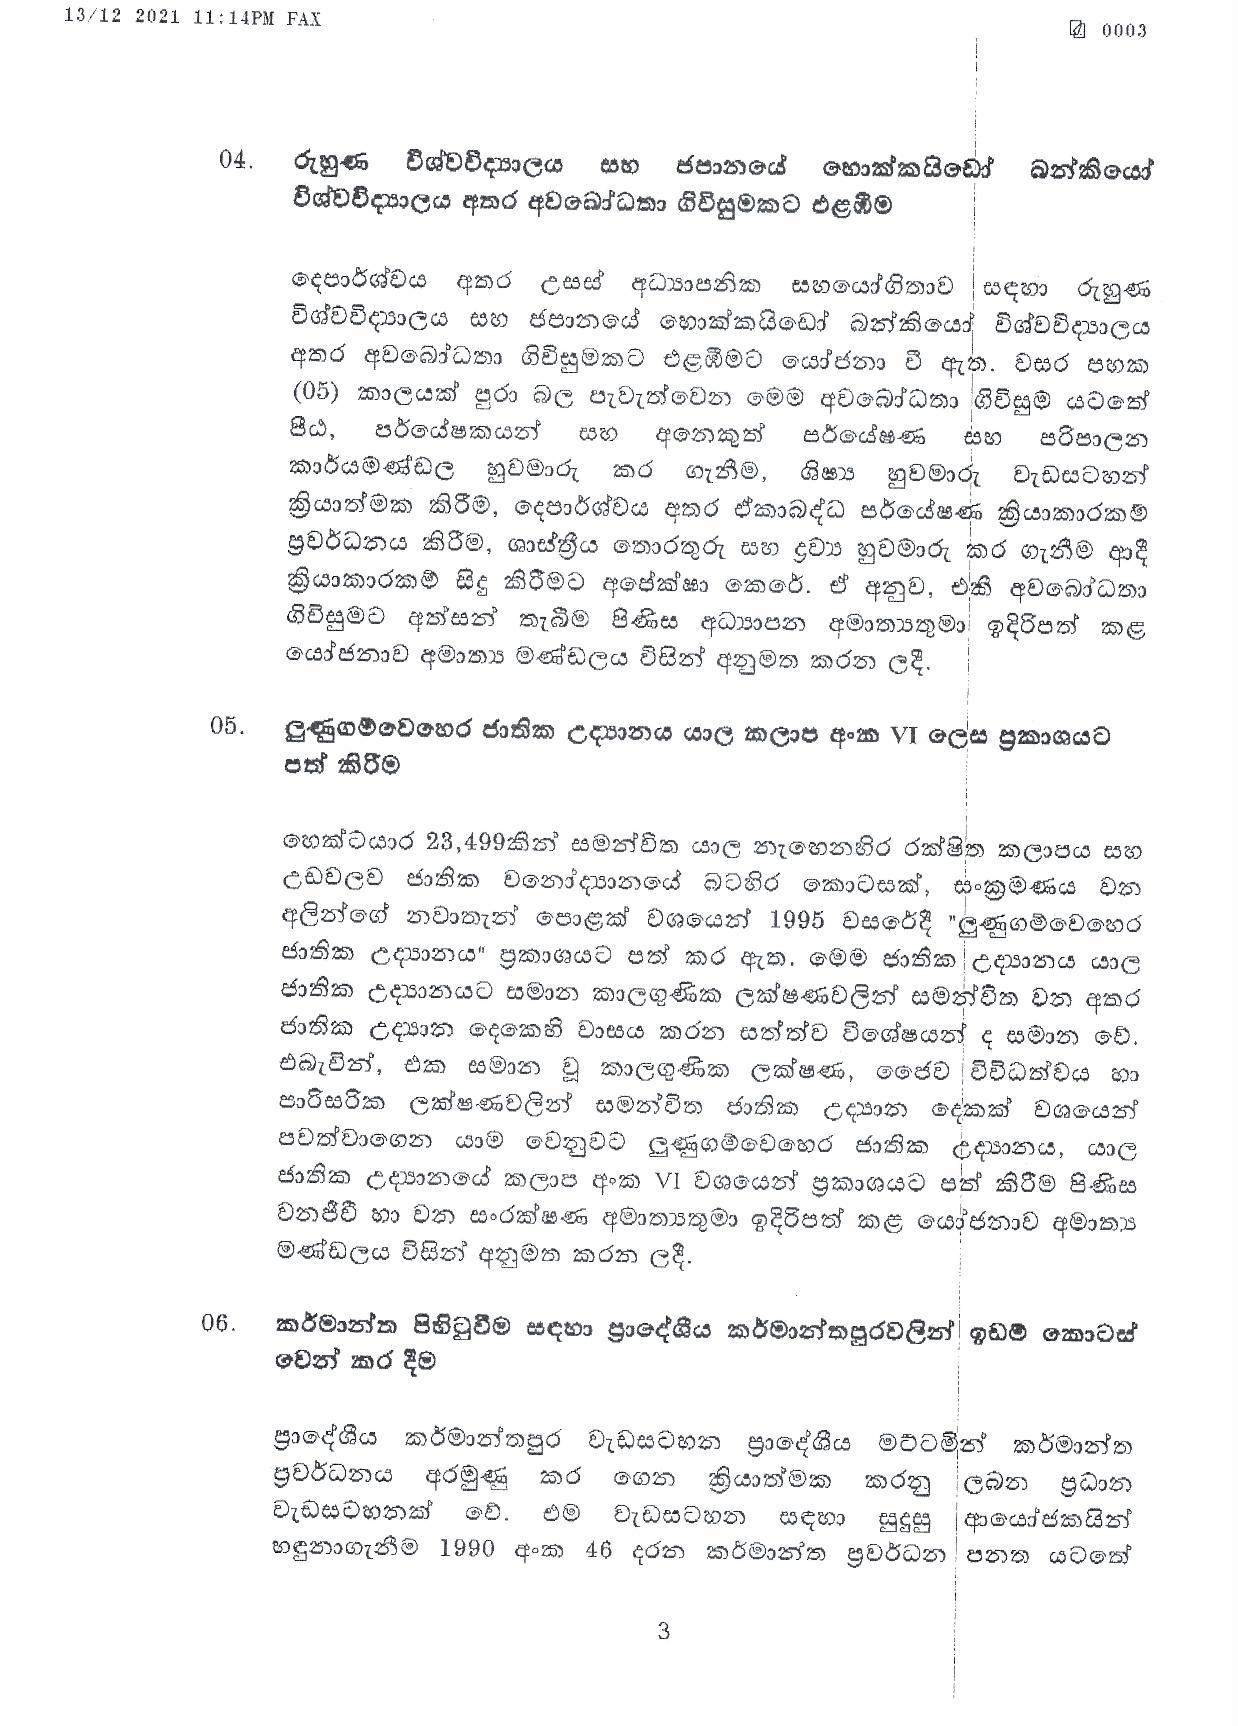 Cabinet Decision on 13.12.2021 page 003